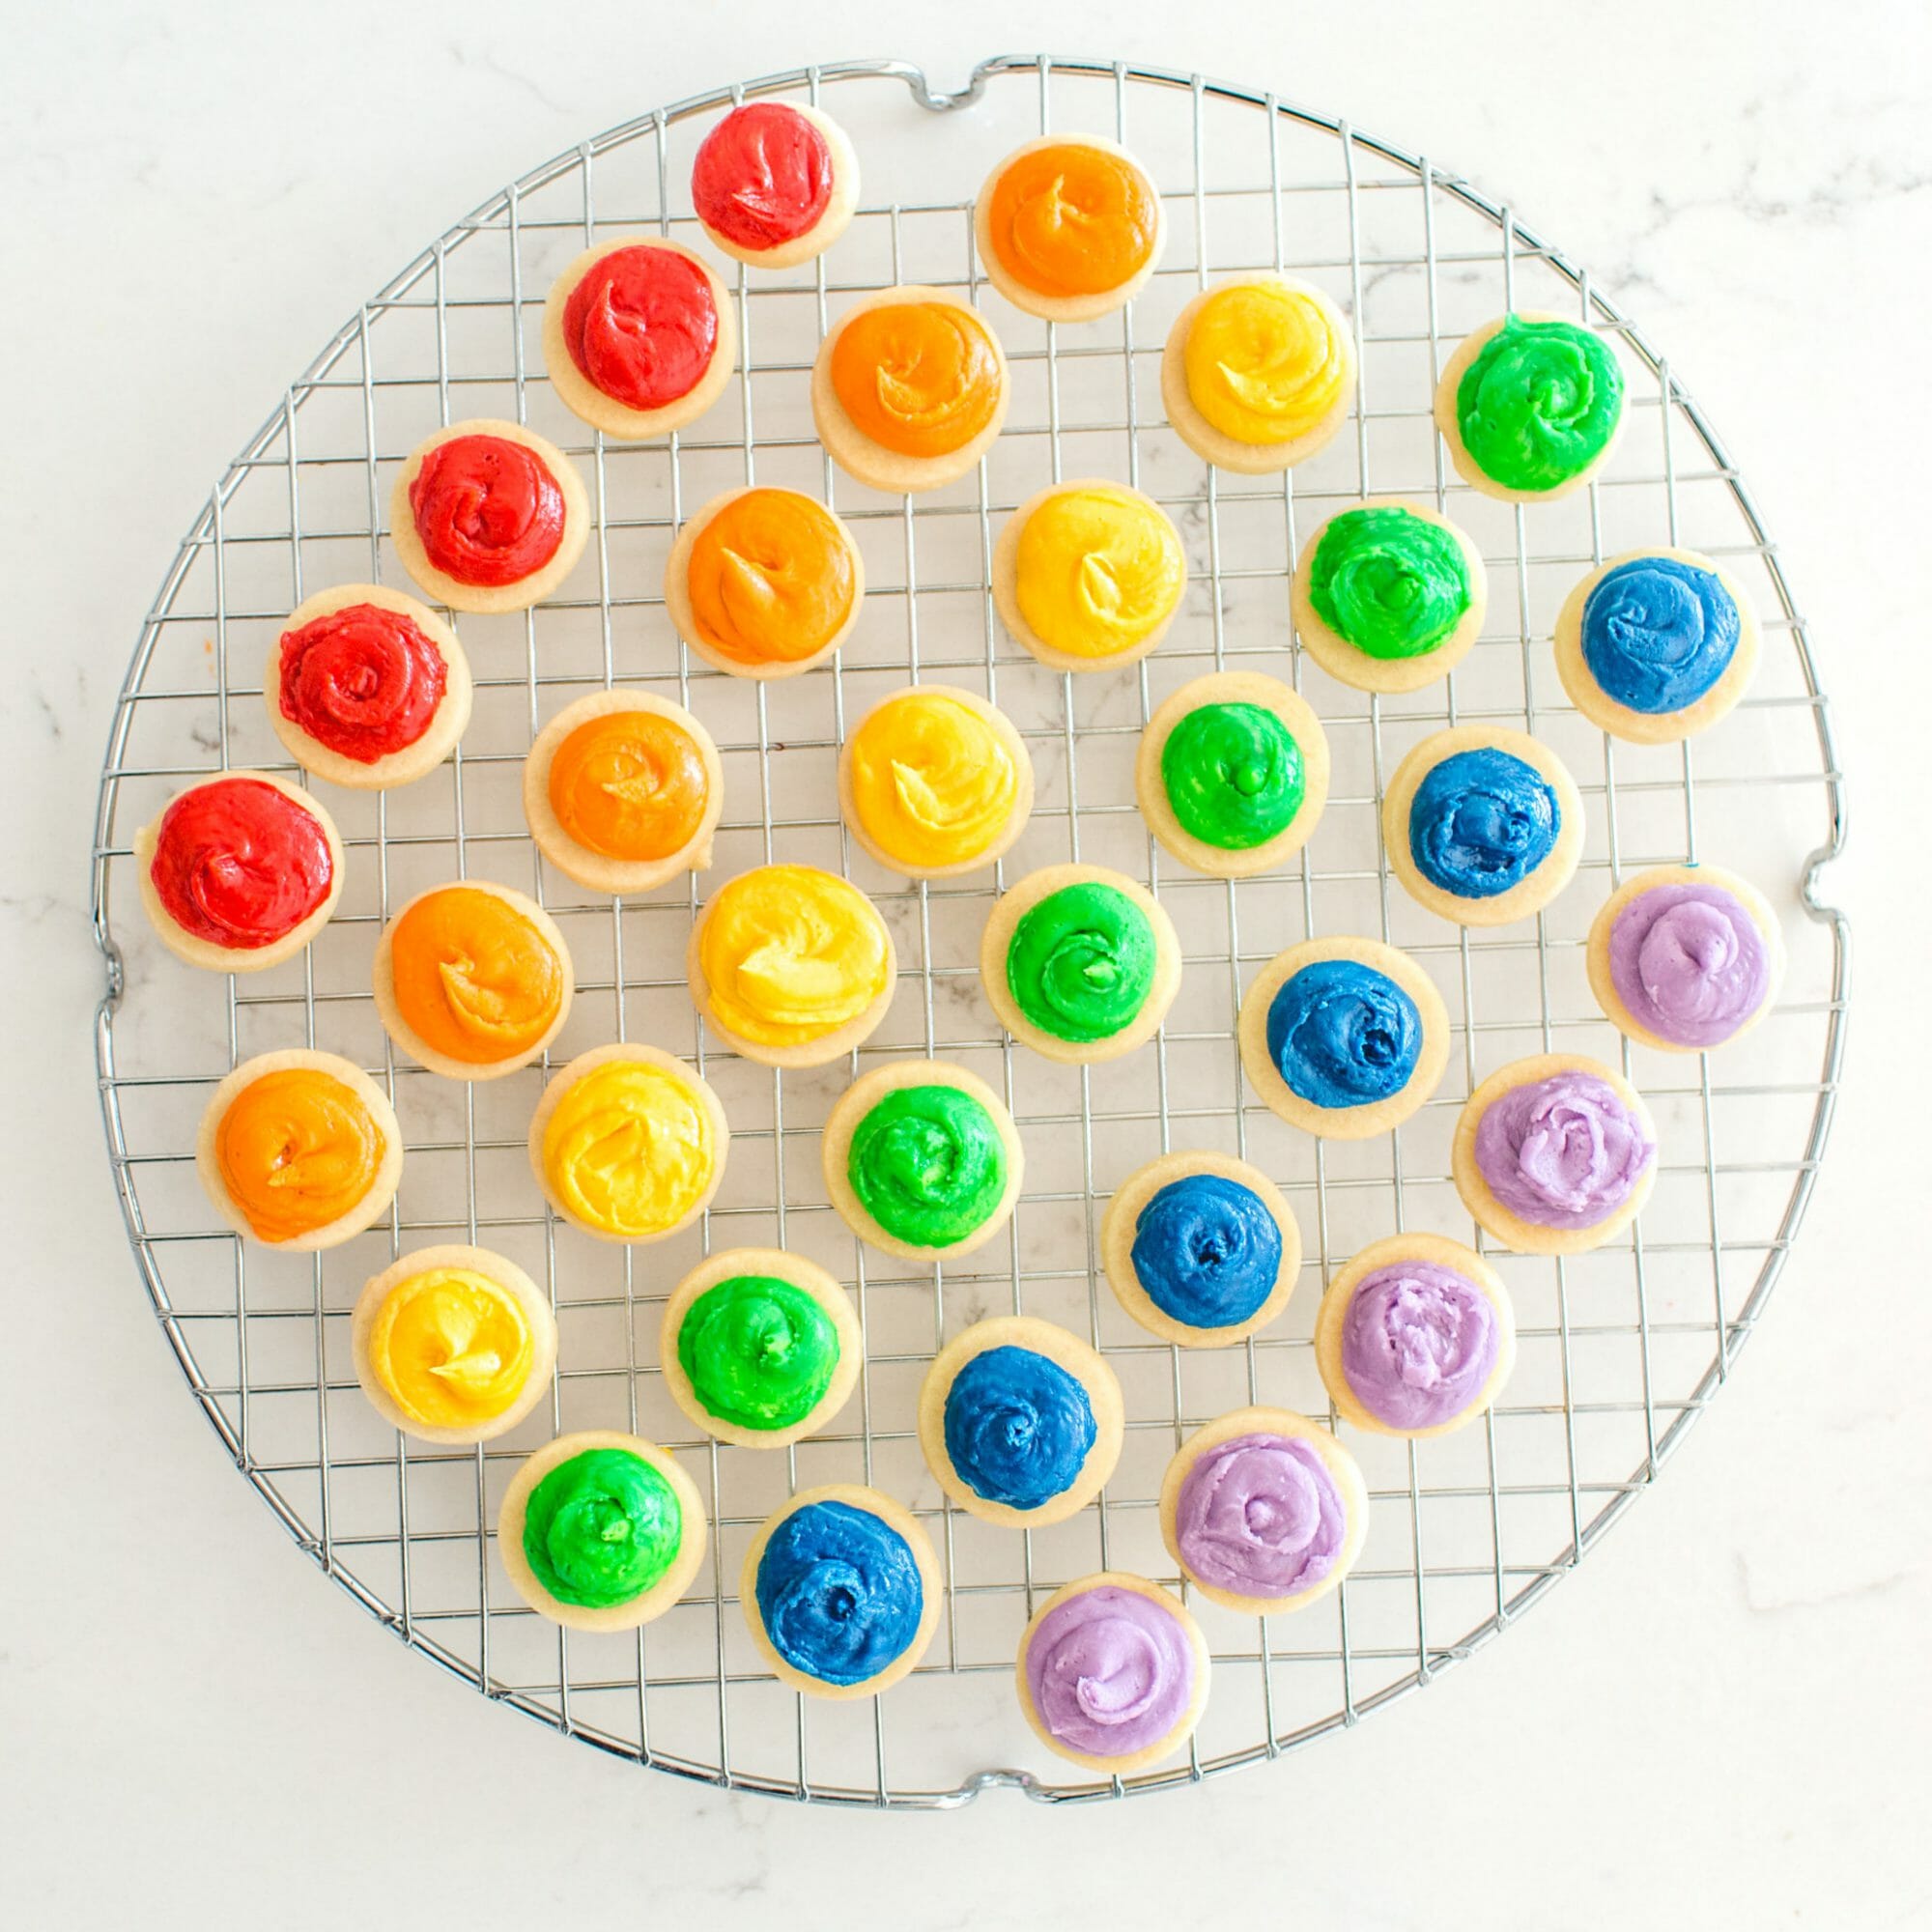 Our St. Patrick's Day Rainbow Treat Board makes for a perfect St. Paddy's day dessert! || JennyCookies.com #stpatricksday #rainbow #stpatricksdaydesserts #jennycookies